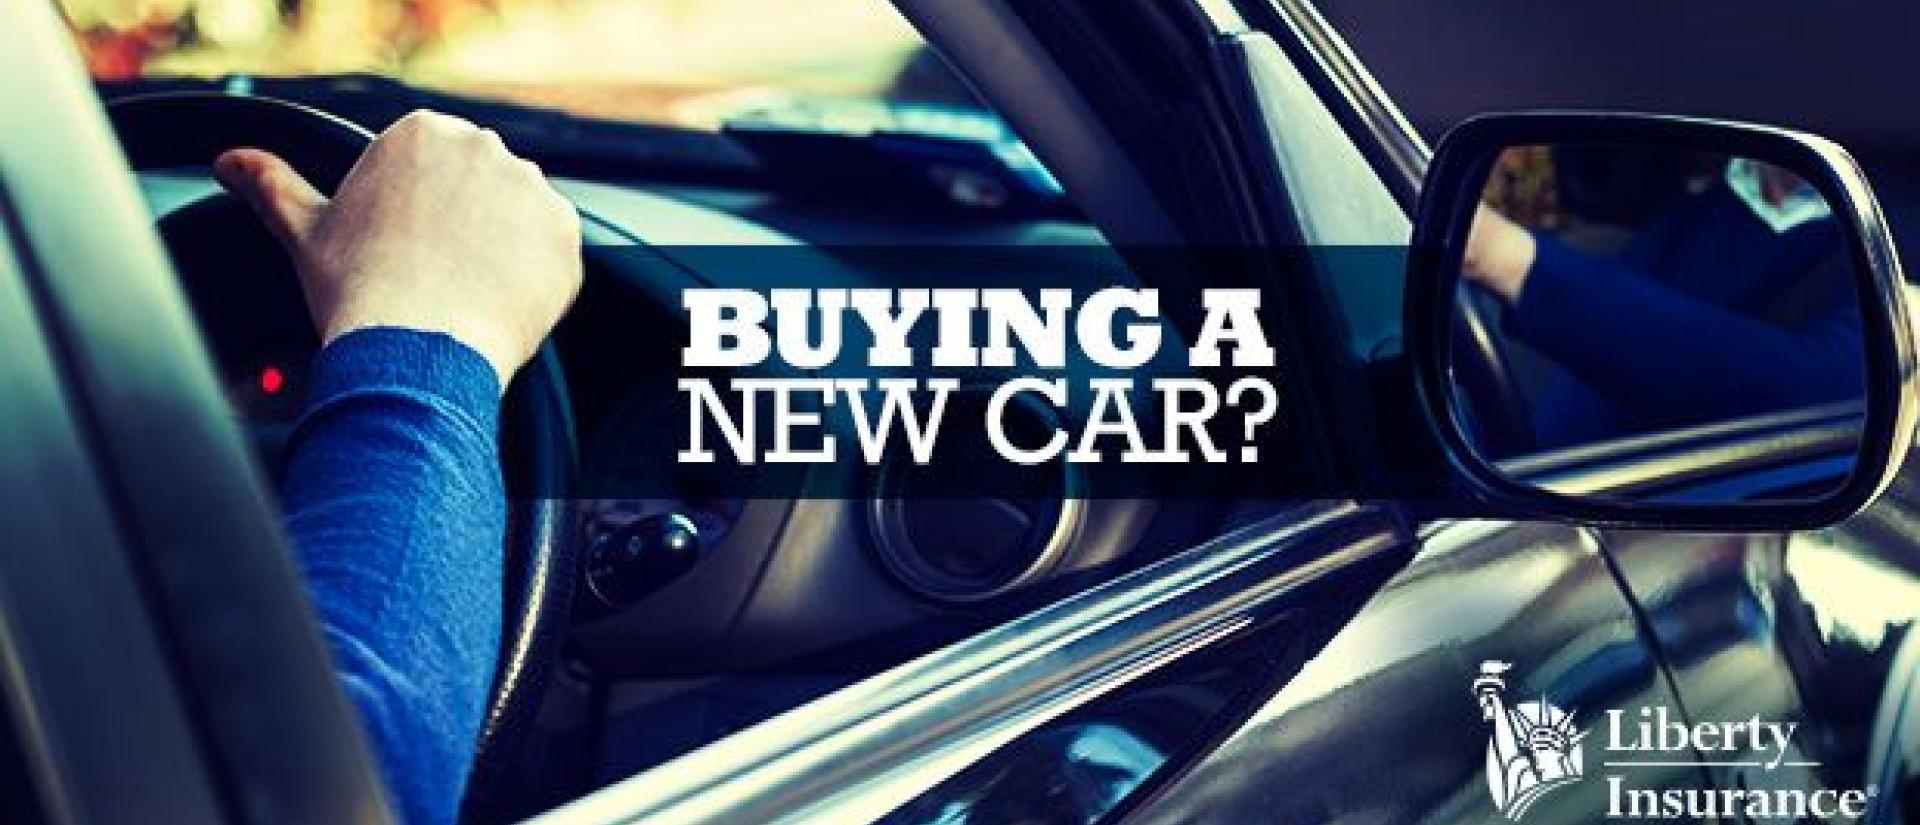 Guide to buying new car 2018